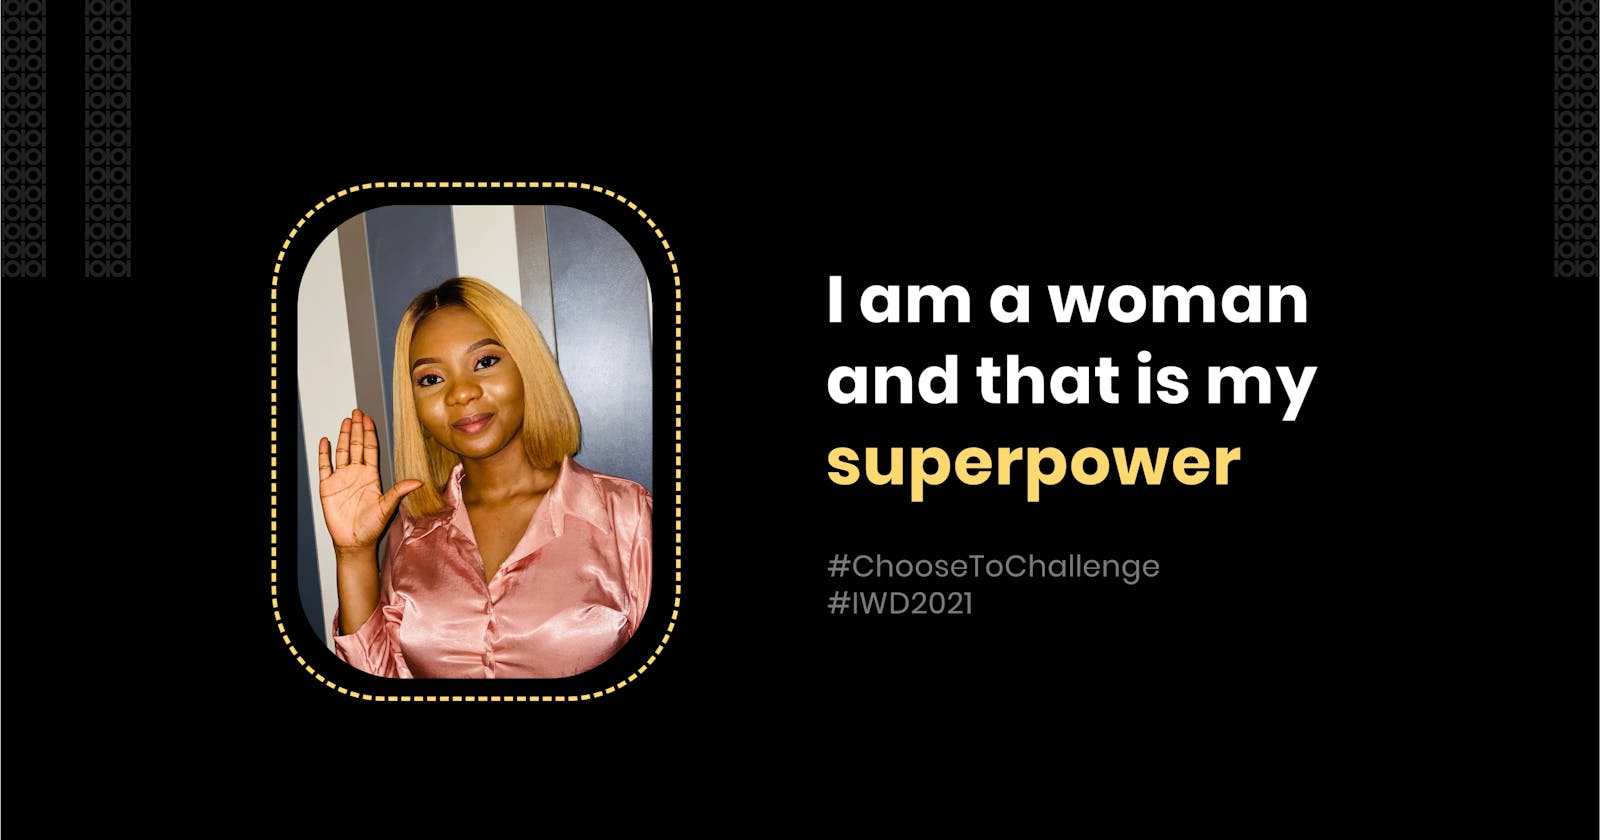 I am a woman, and that is my superpower